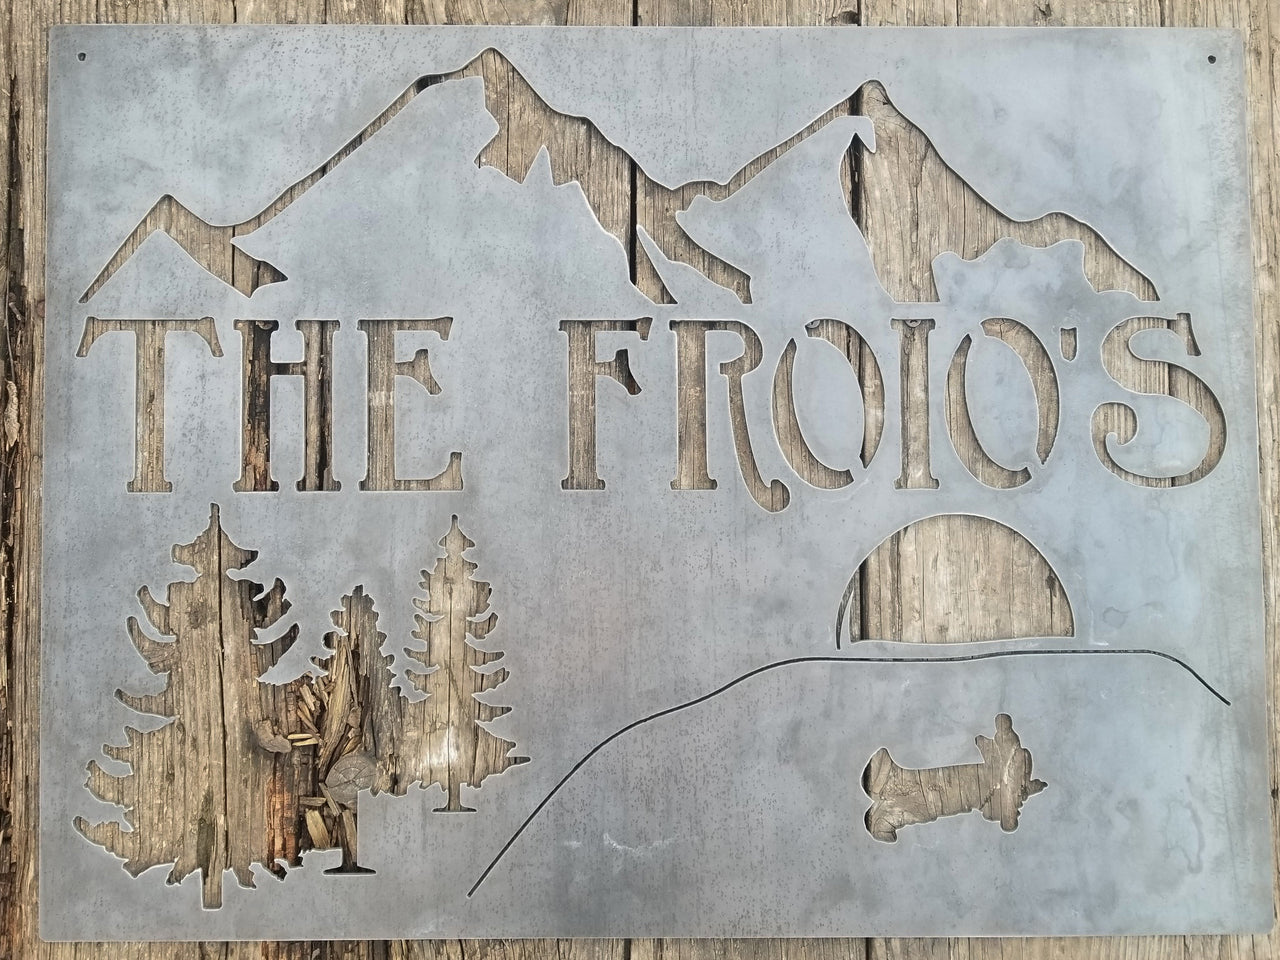 This is rectangular sign that displays a mountain range over a lake that is surrounded by trees. In the center of the lake is a boat with the figure of a man fishing who cast a shadow by the light of a sunset. Under the mountain range is a line of text that reads, "The Froio's"